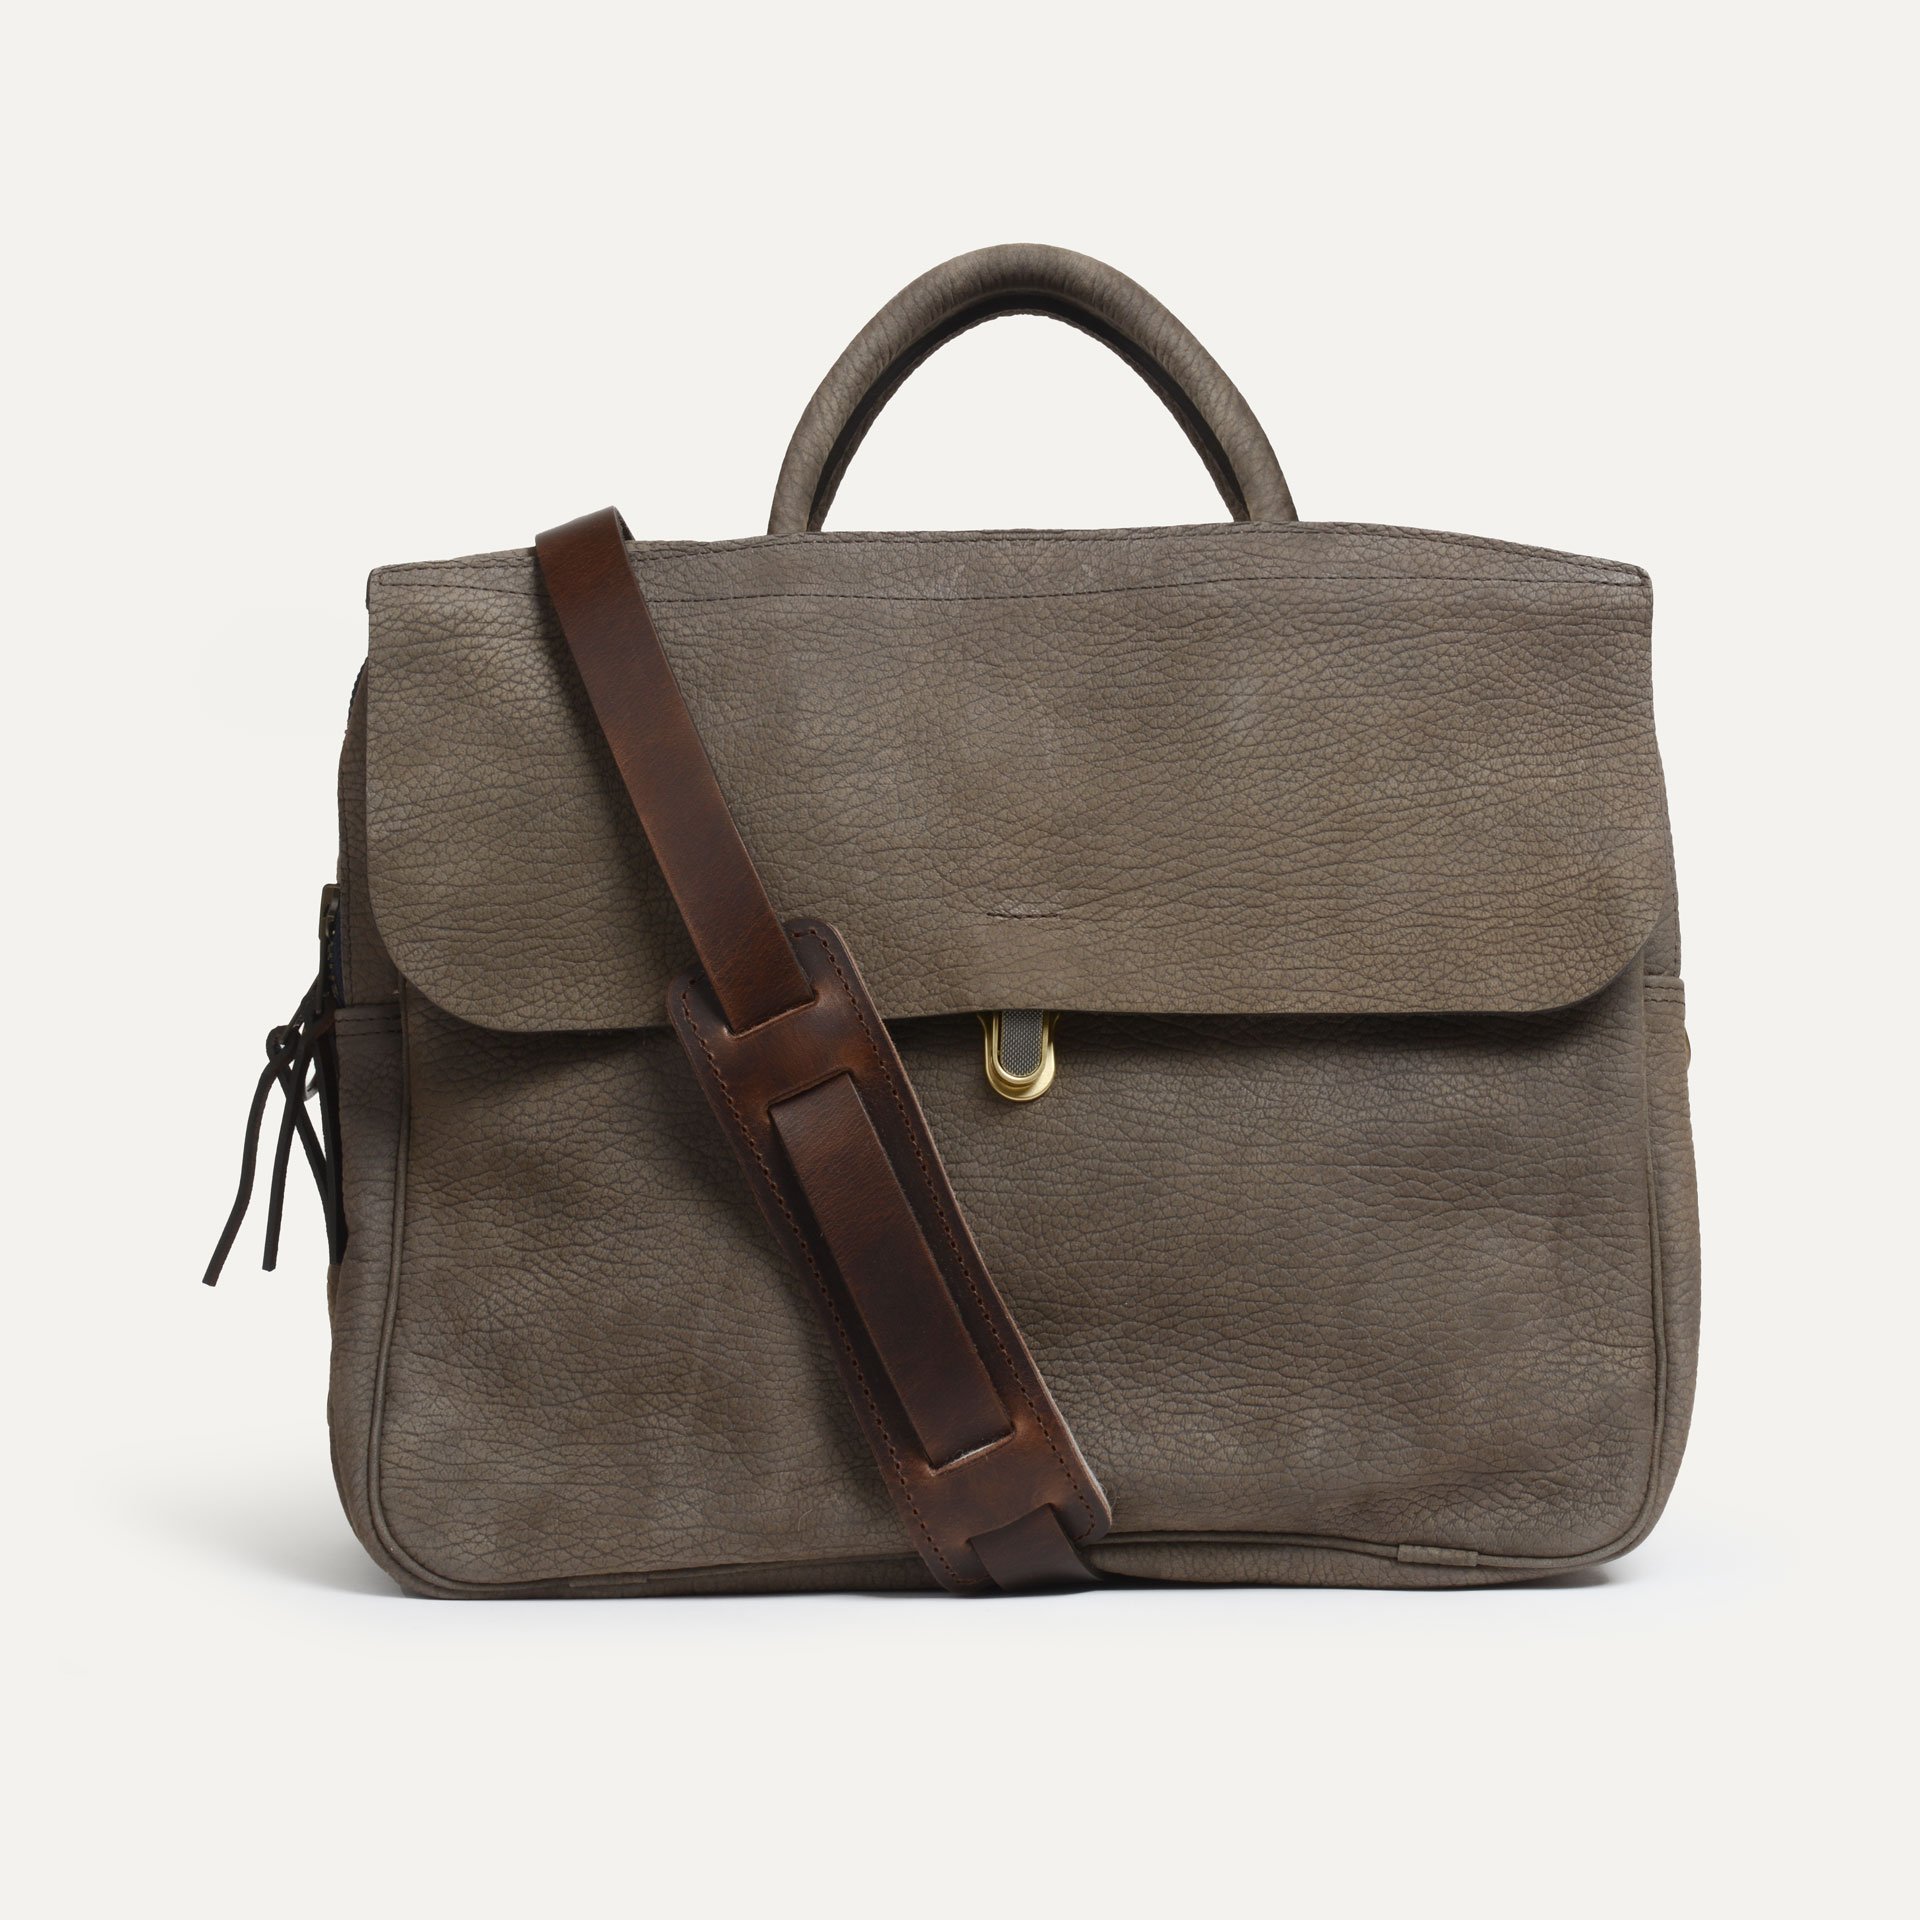 Sac business homme